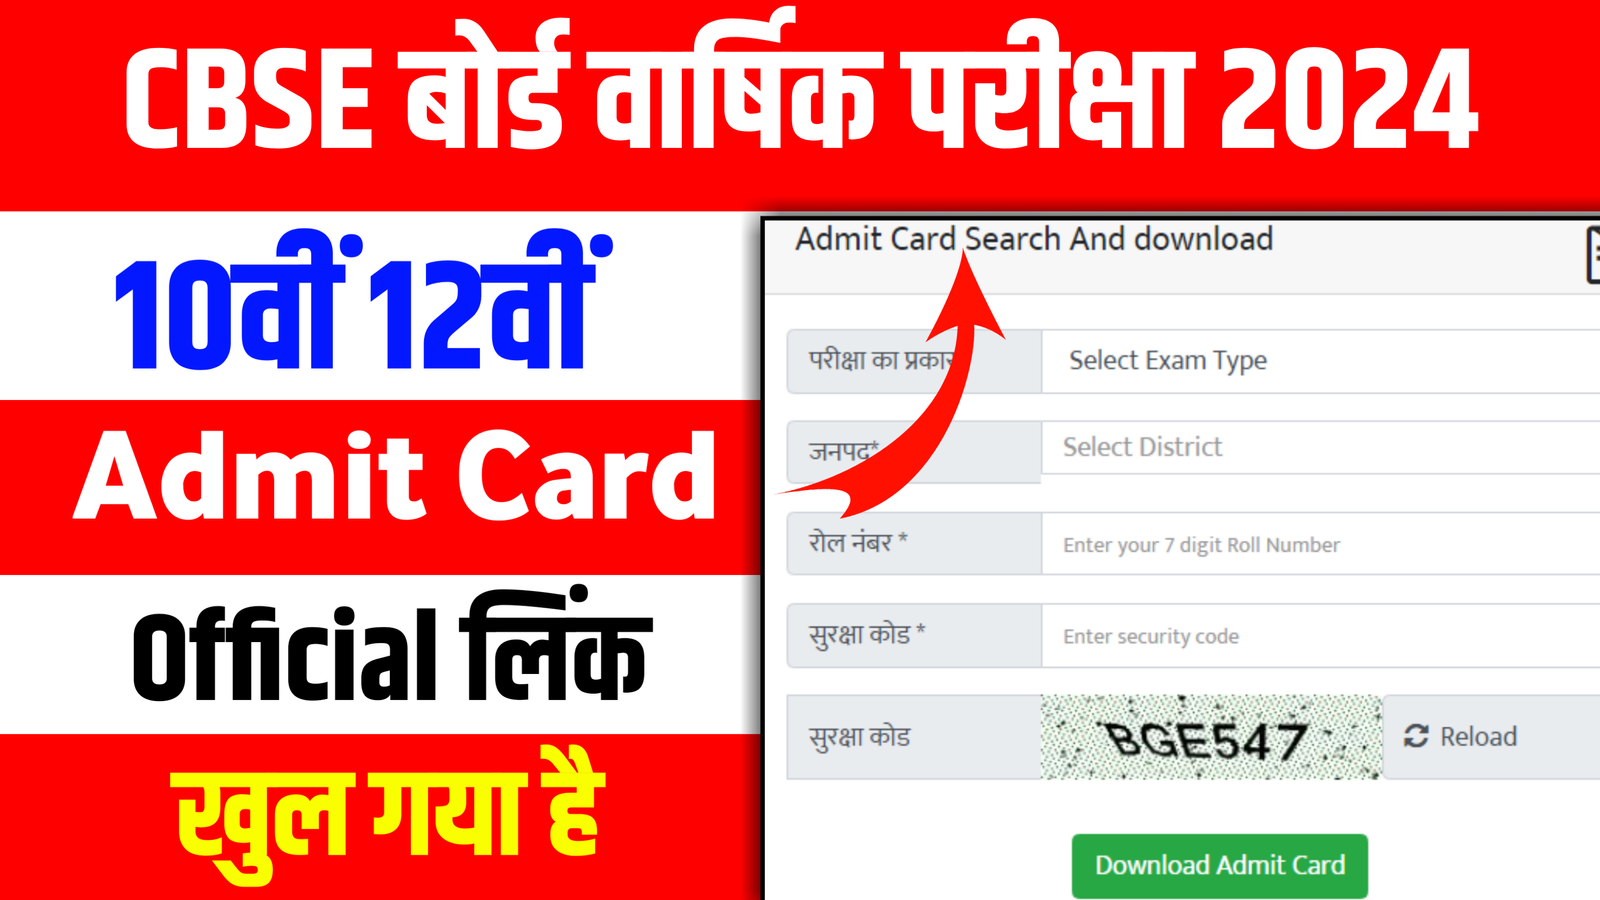 CBSE Matric Inter Admit Card Announced Today 2024: